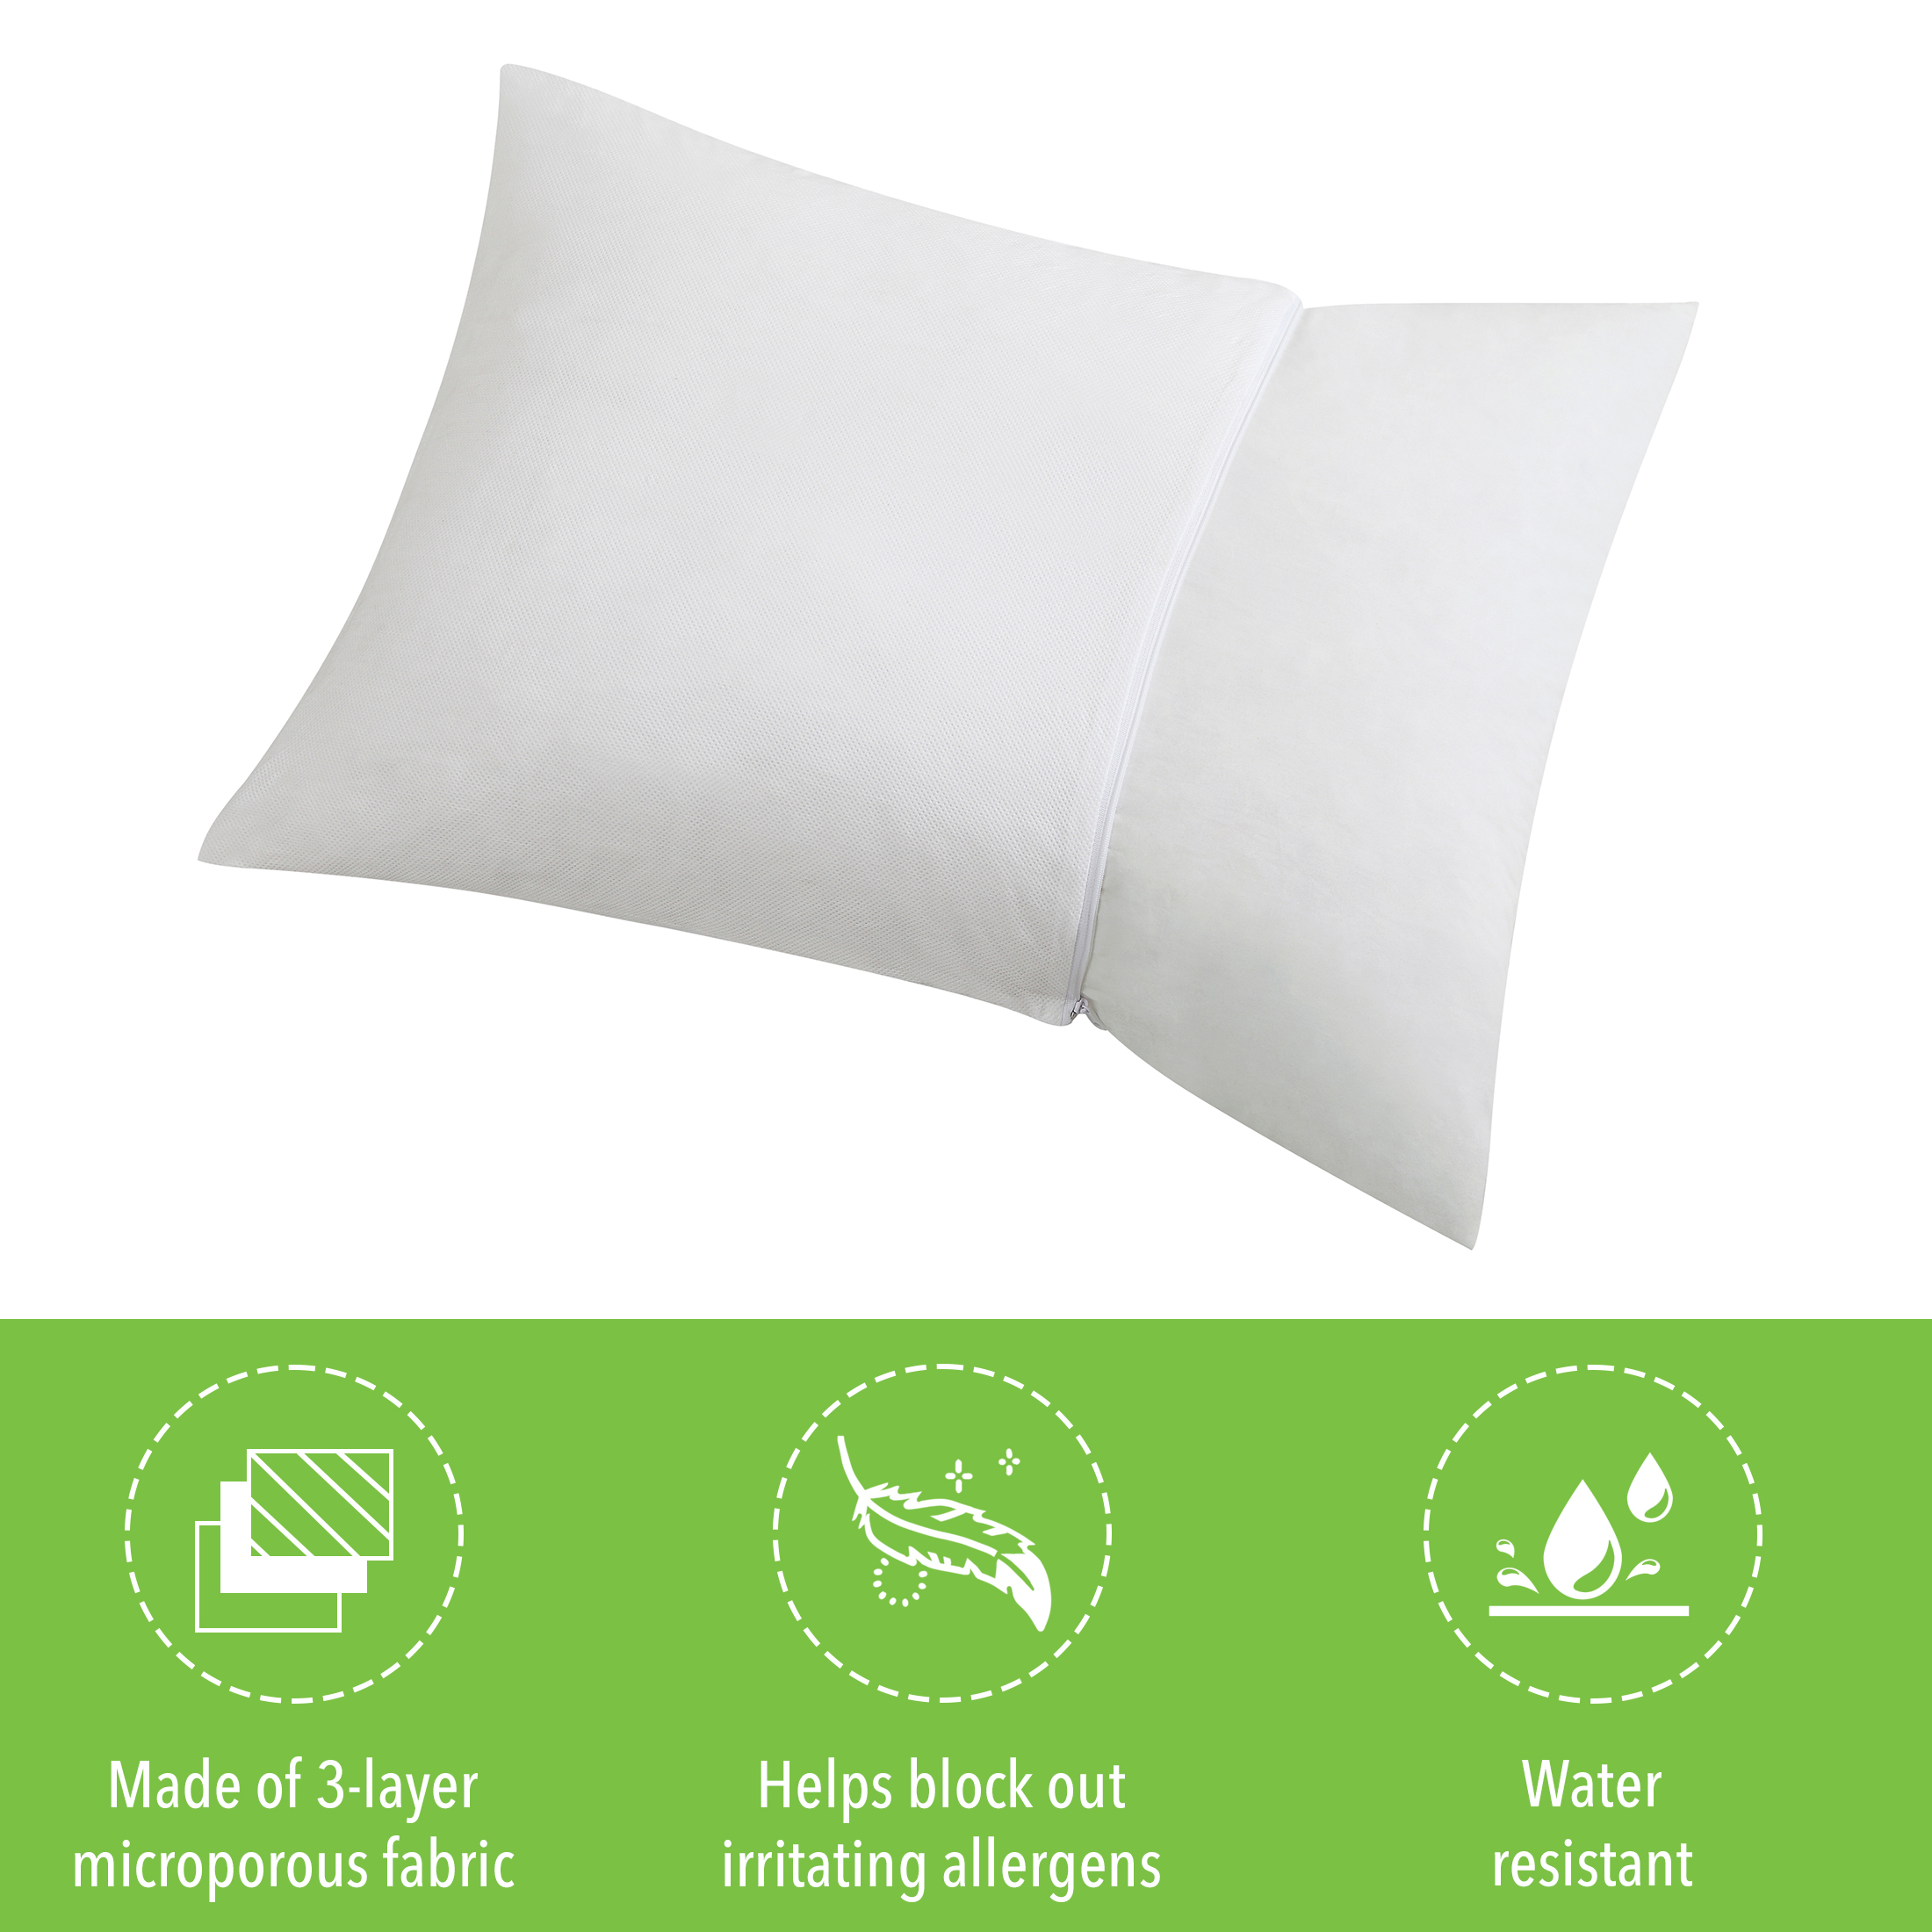 Pillow Guard Allergy Relief Water Resistant Zippered Pillow Protectors, Standard, 2 Pack - image 3 of 7